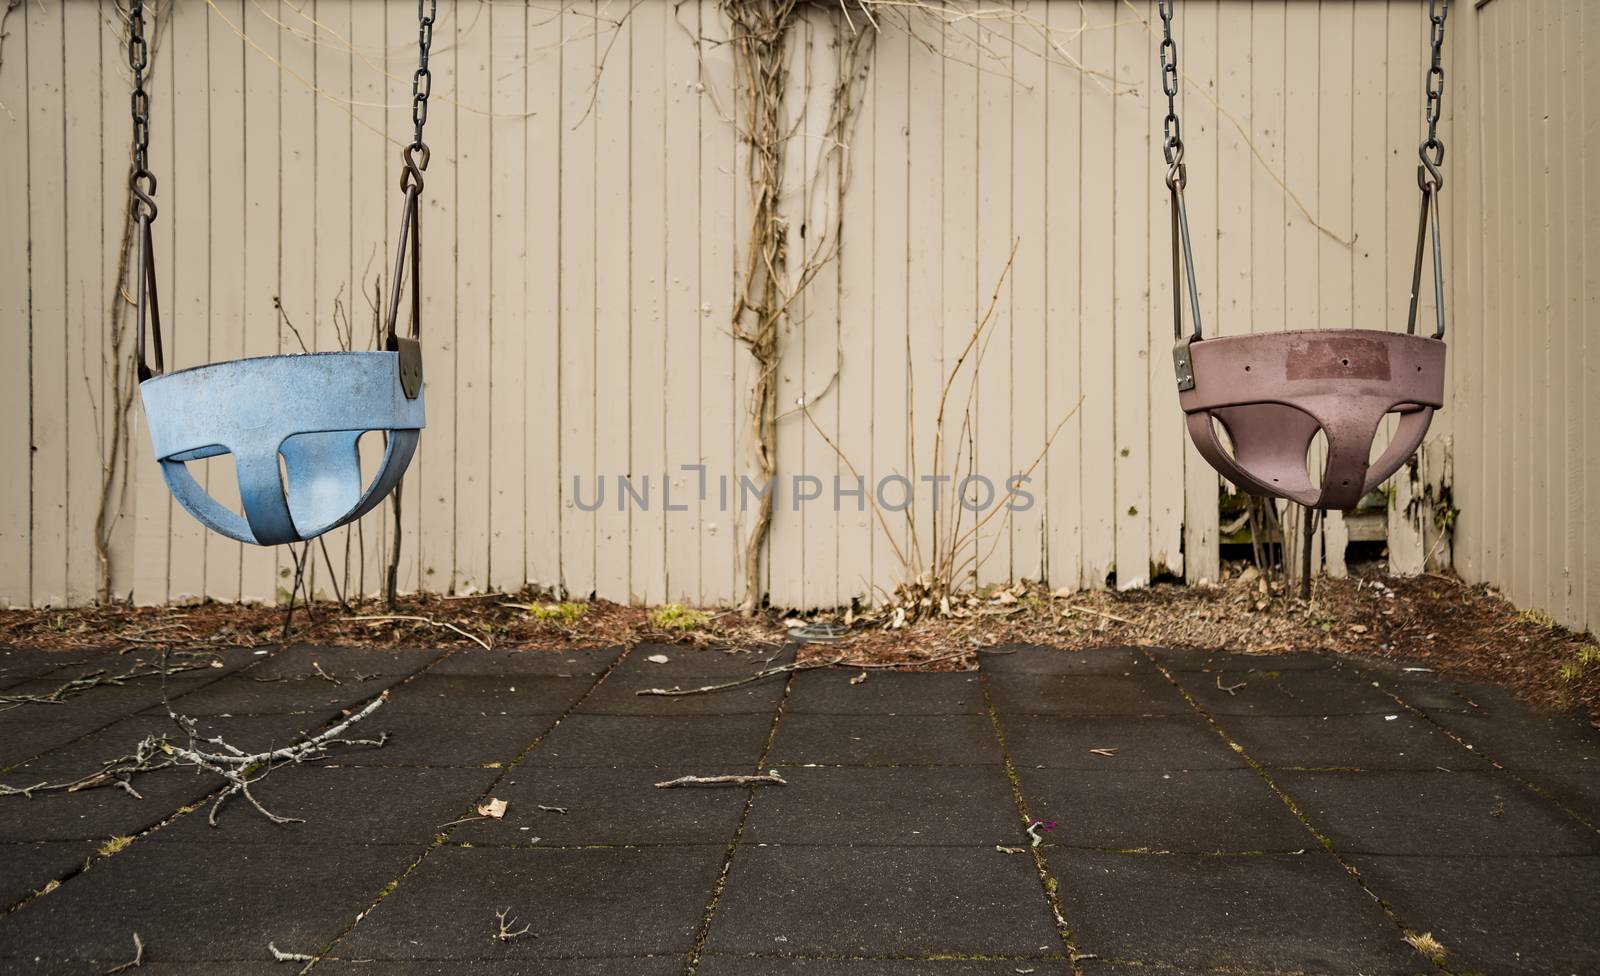 Children swing, playground in the park. vintage style in New Hampshire, USA